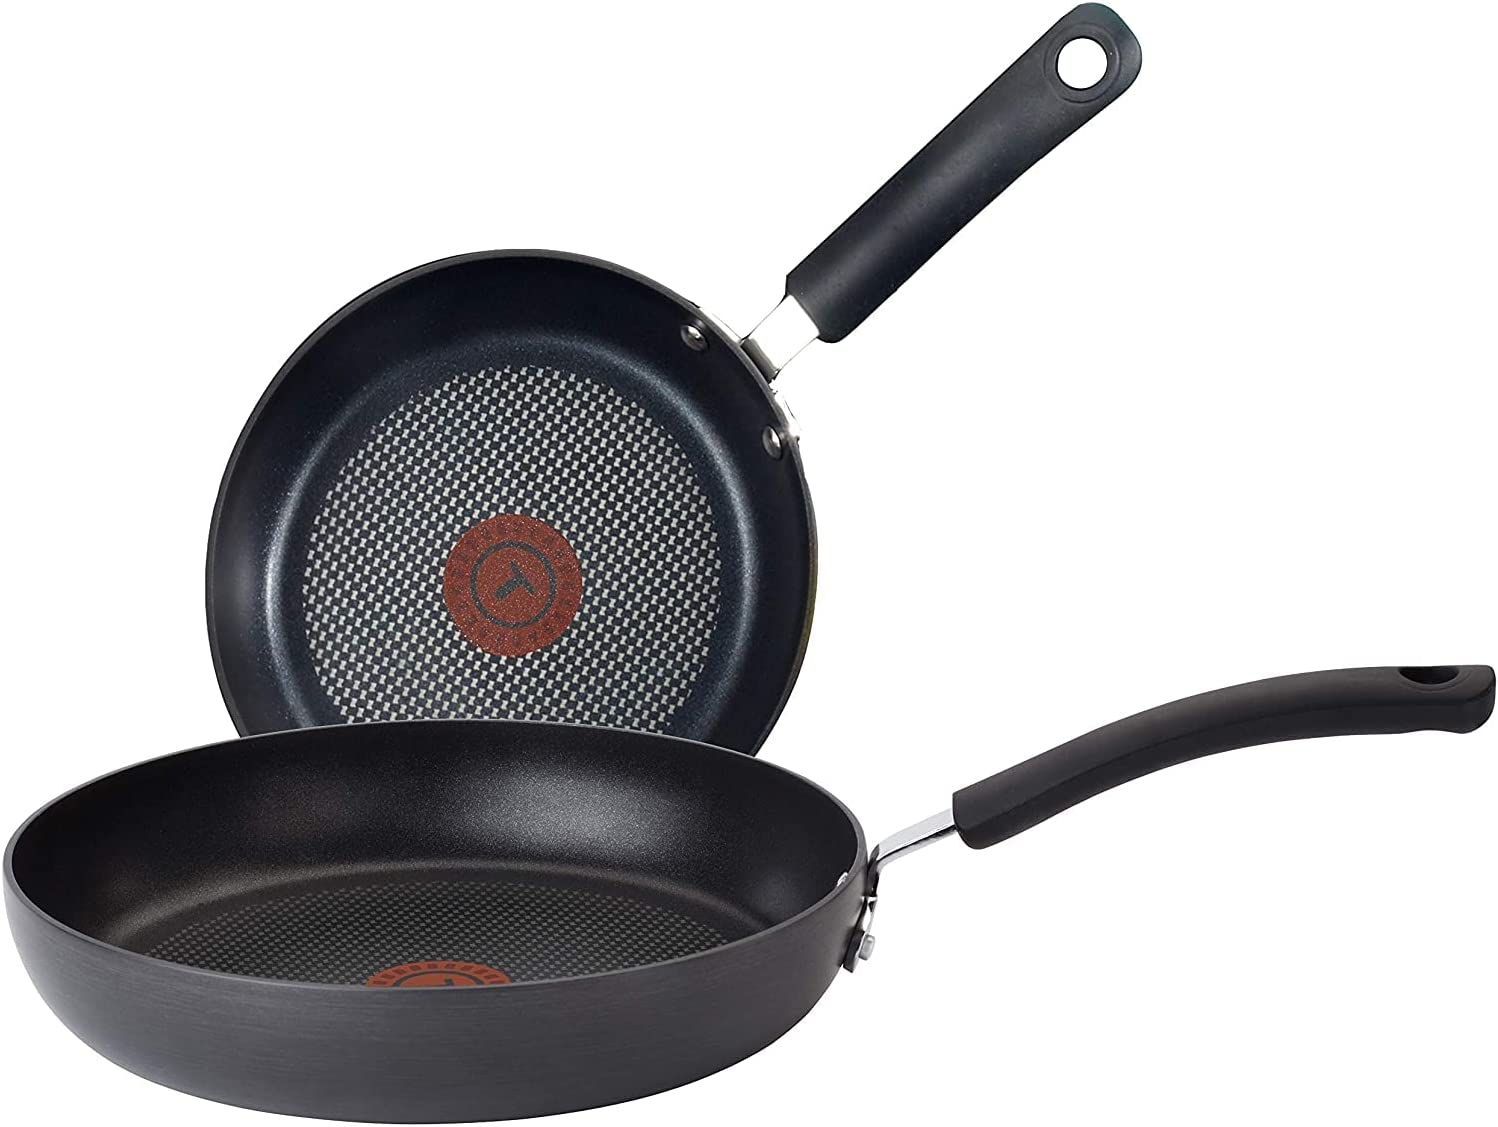 T-fal Ultimate Hard Anodized Nonstick Fry Pan Set 10, 12 Inch Cookware, Pots  and Pans, Dishwasher Safe Grey